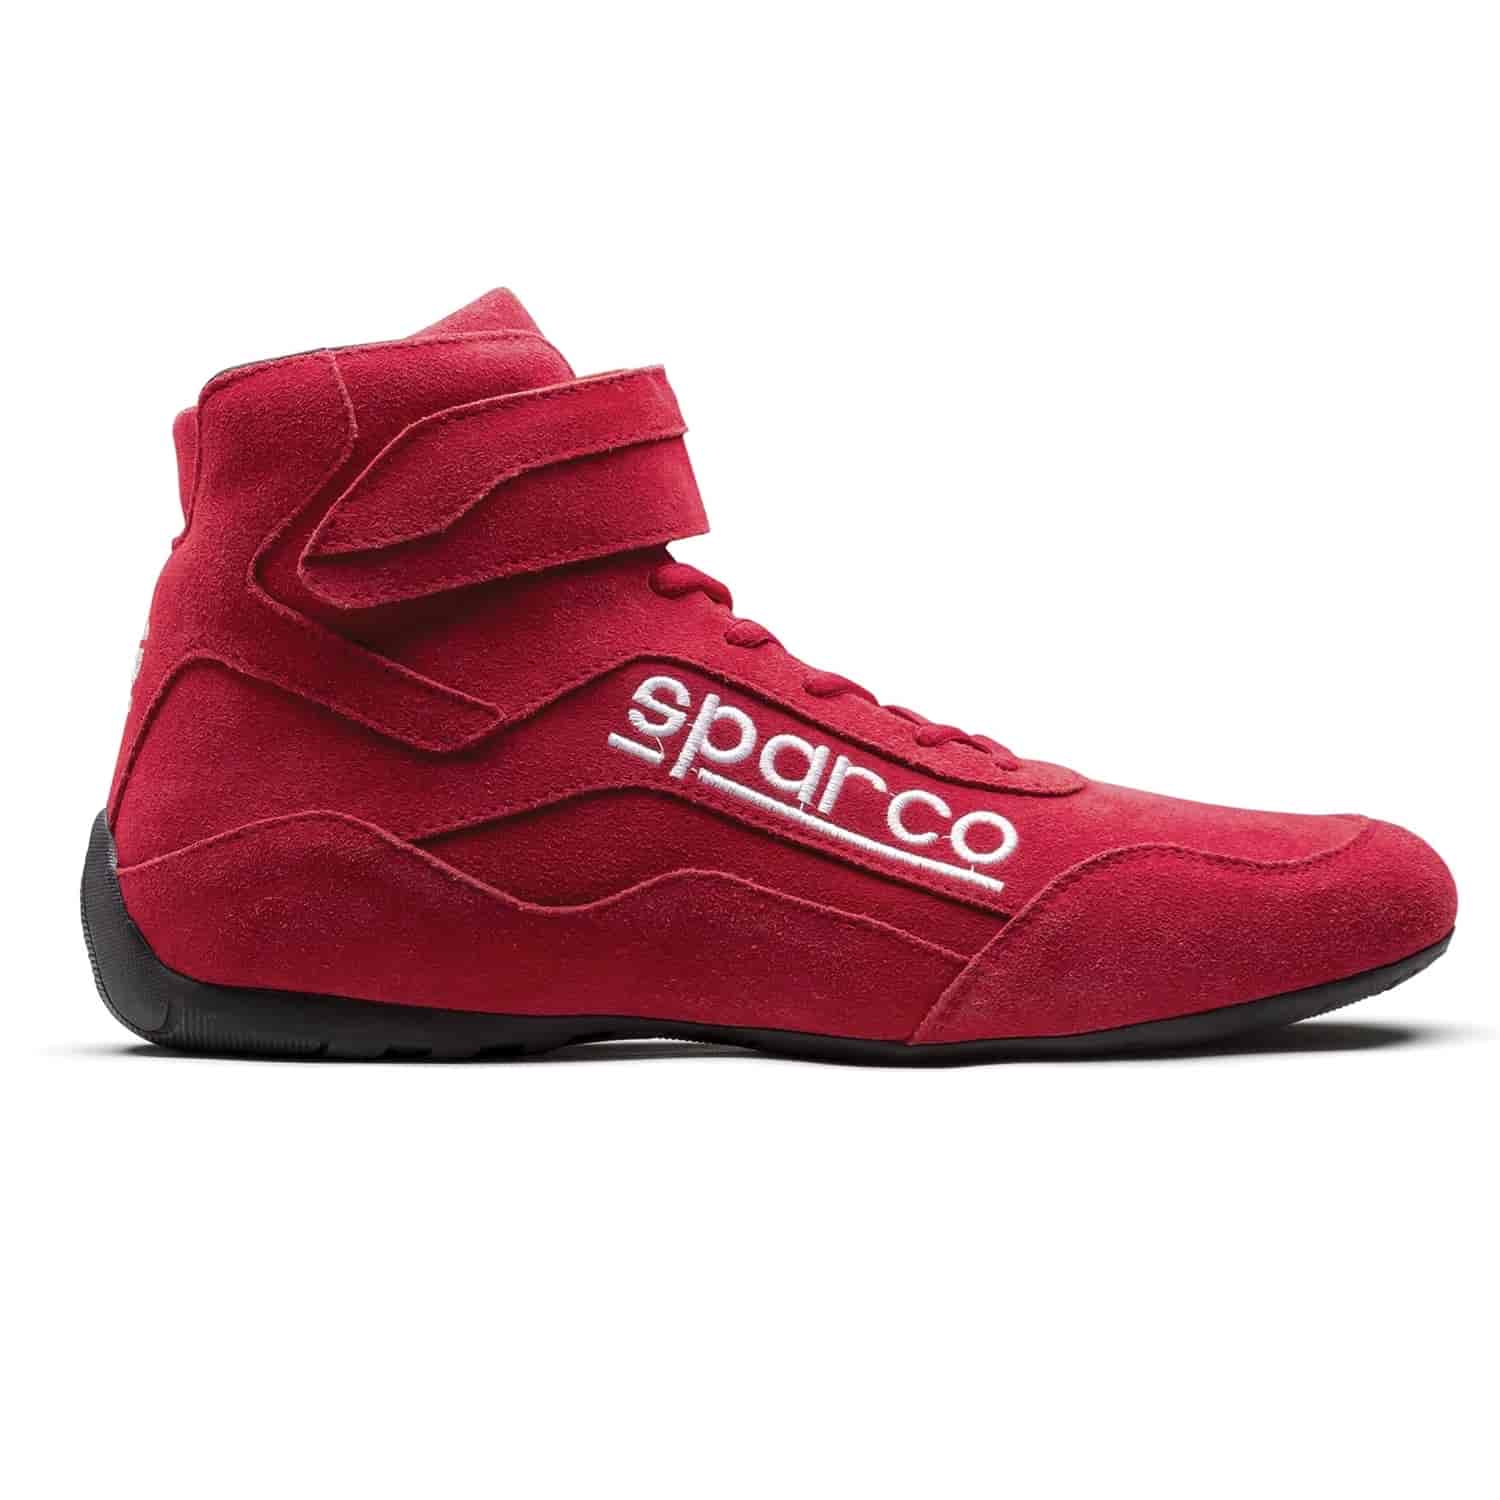 Race 2 Shoe Size 9 - Red